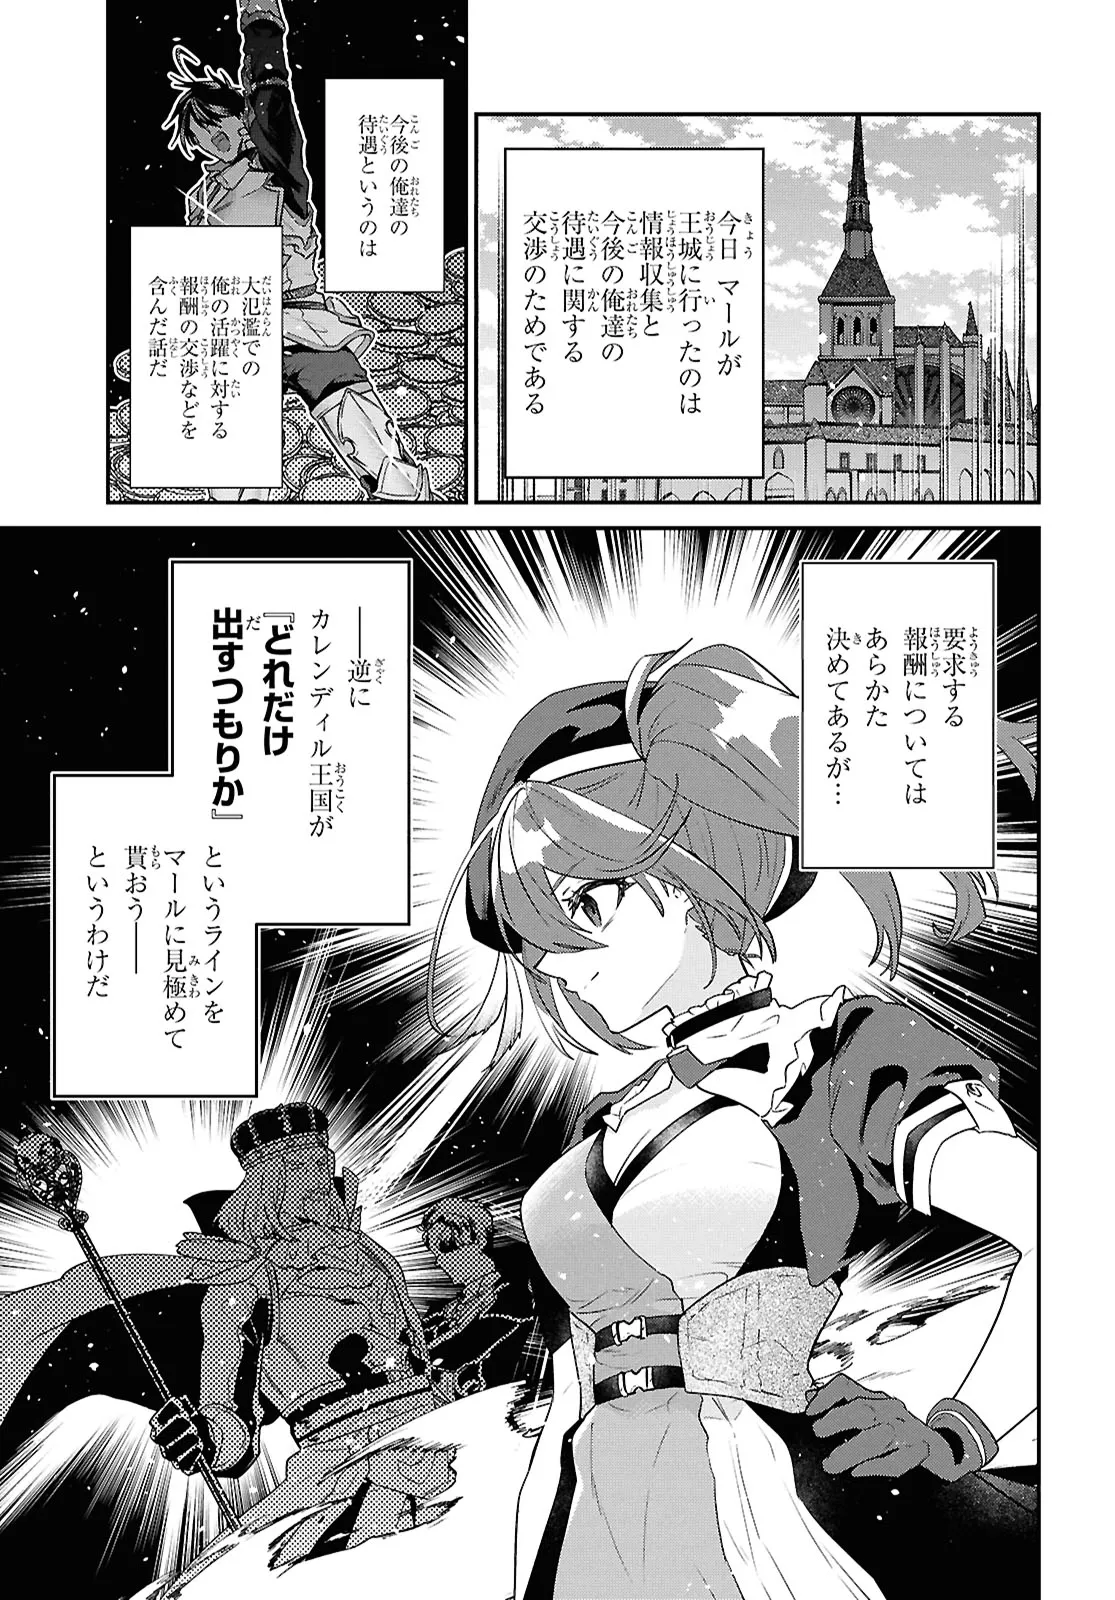 29-Years-Old Bachelor Was… Brought to a Different World to Live Freely 第36.2話 - Page 4